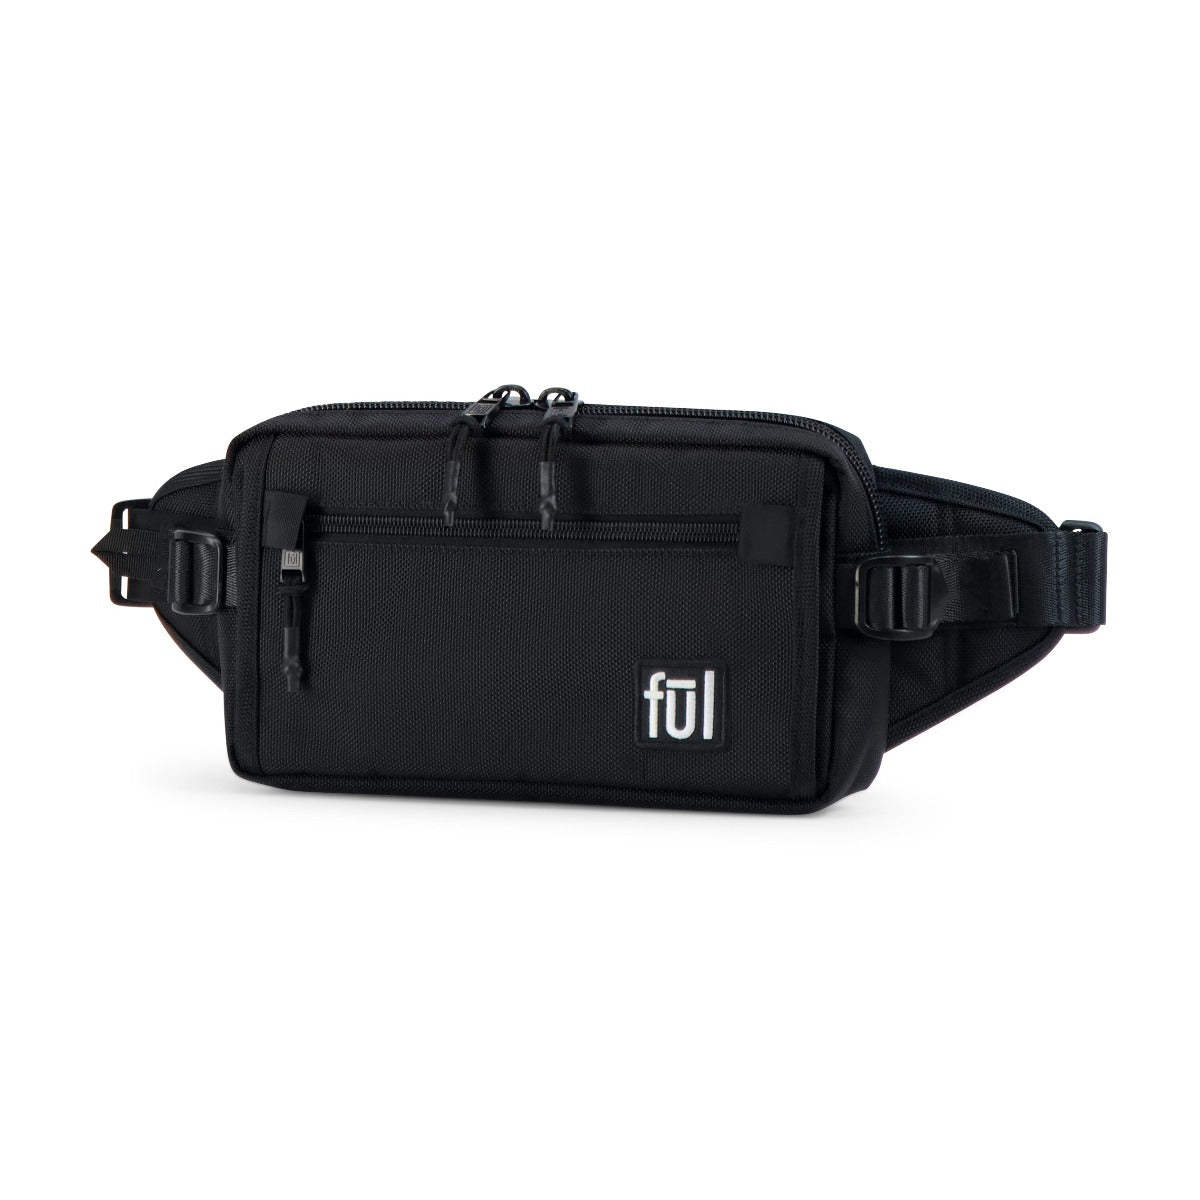 Ful tactics collection scout waistpack black - best fanny packs for travelling